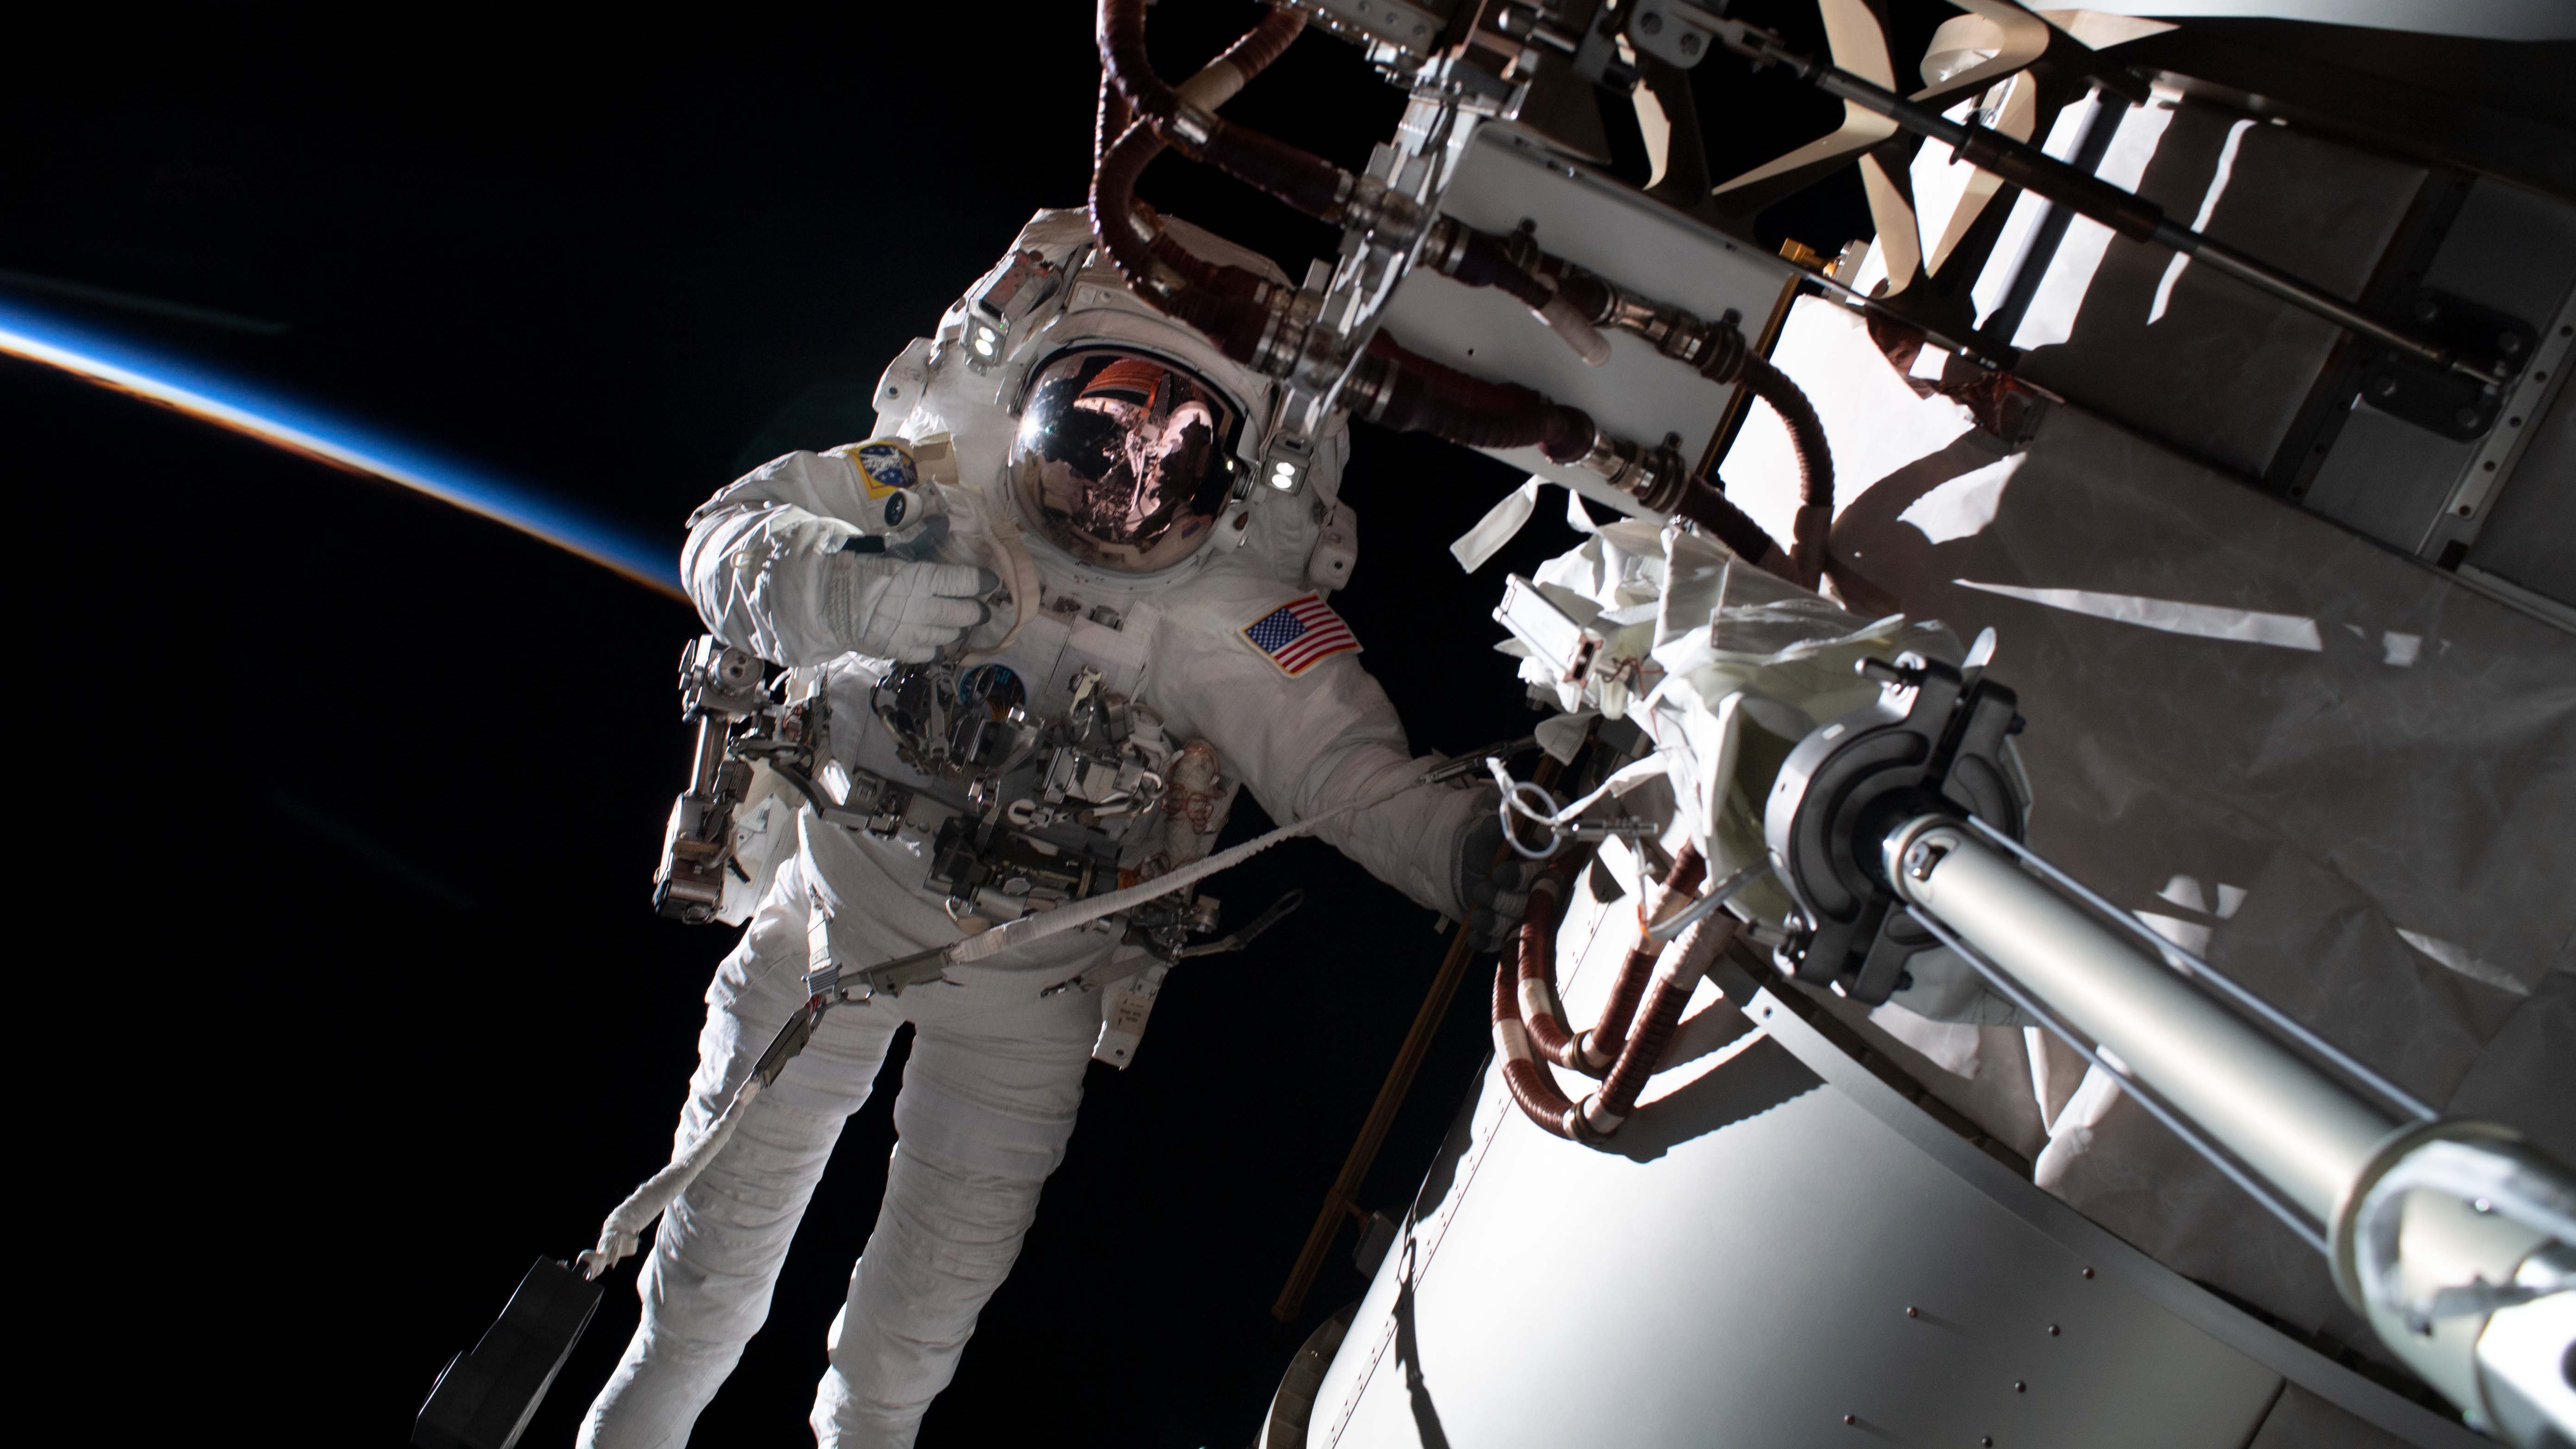 Army Astronaut Lt. Col. (Dr.) Frank Rubio completes a spacewalk tethered to the International Space Station’s starboard truss structure, Nov. 15, 2022. (NASA photo)